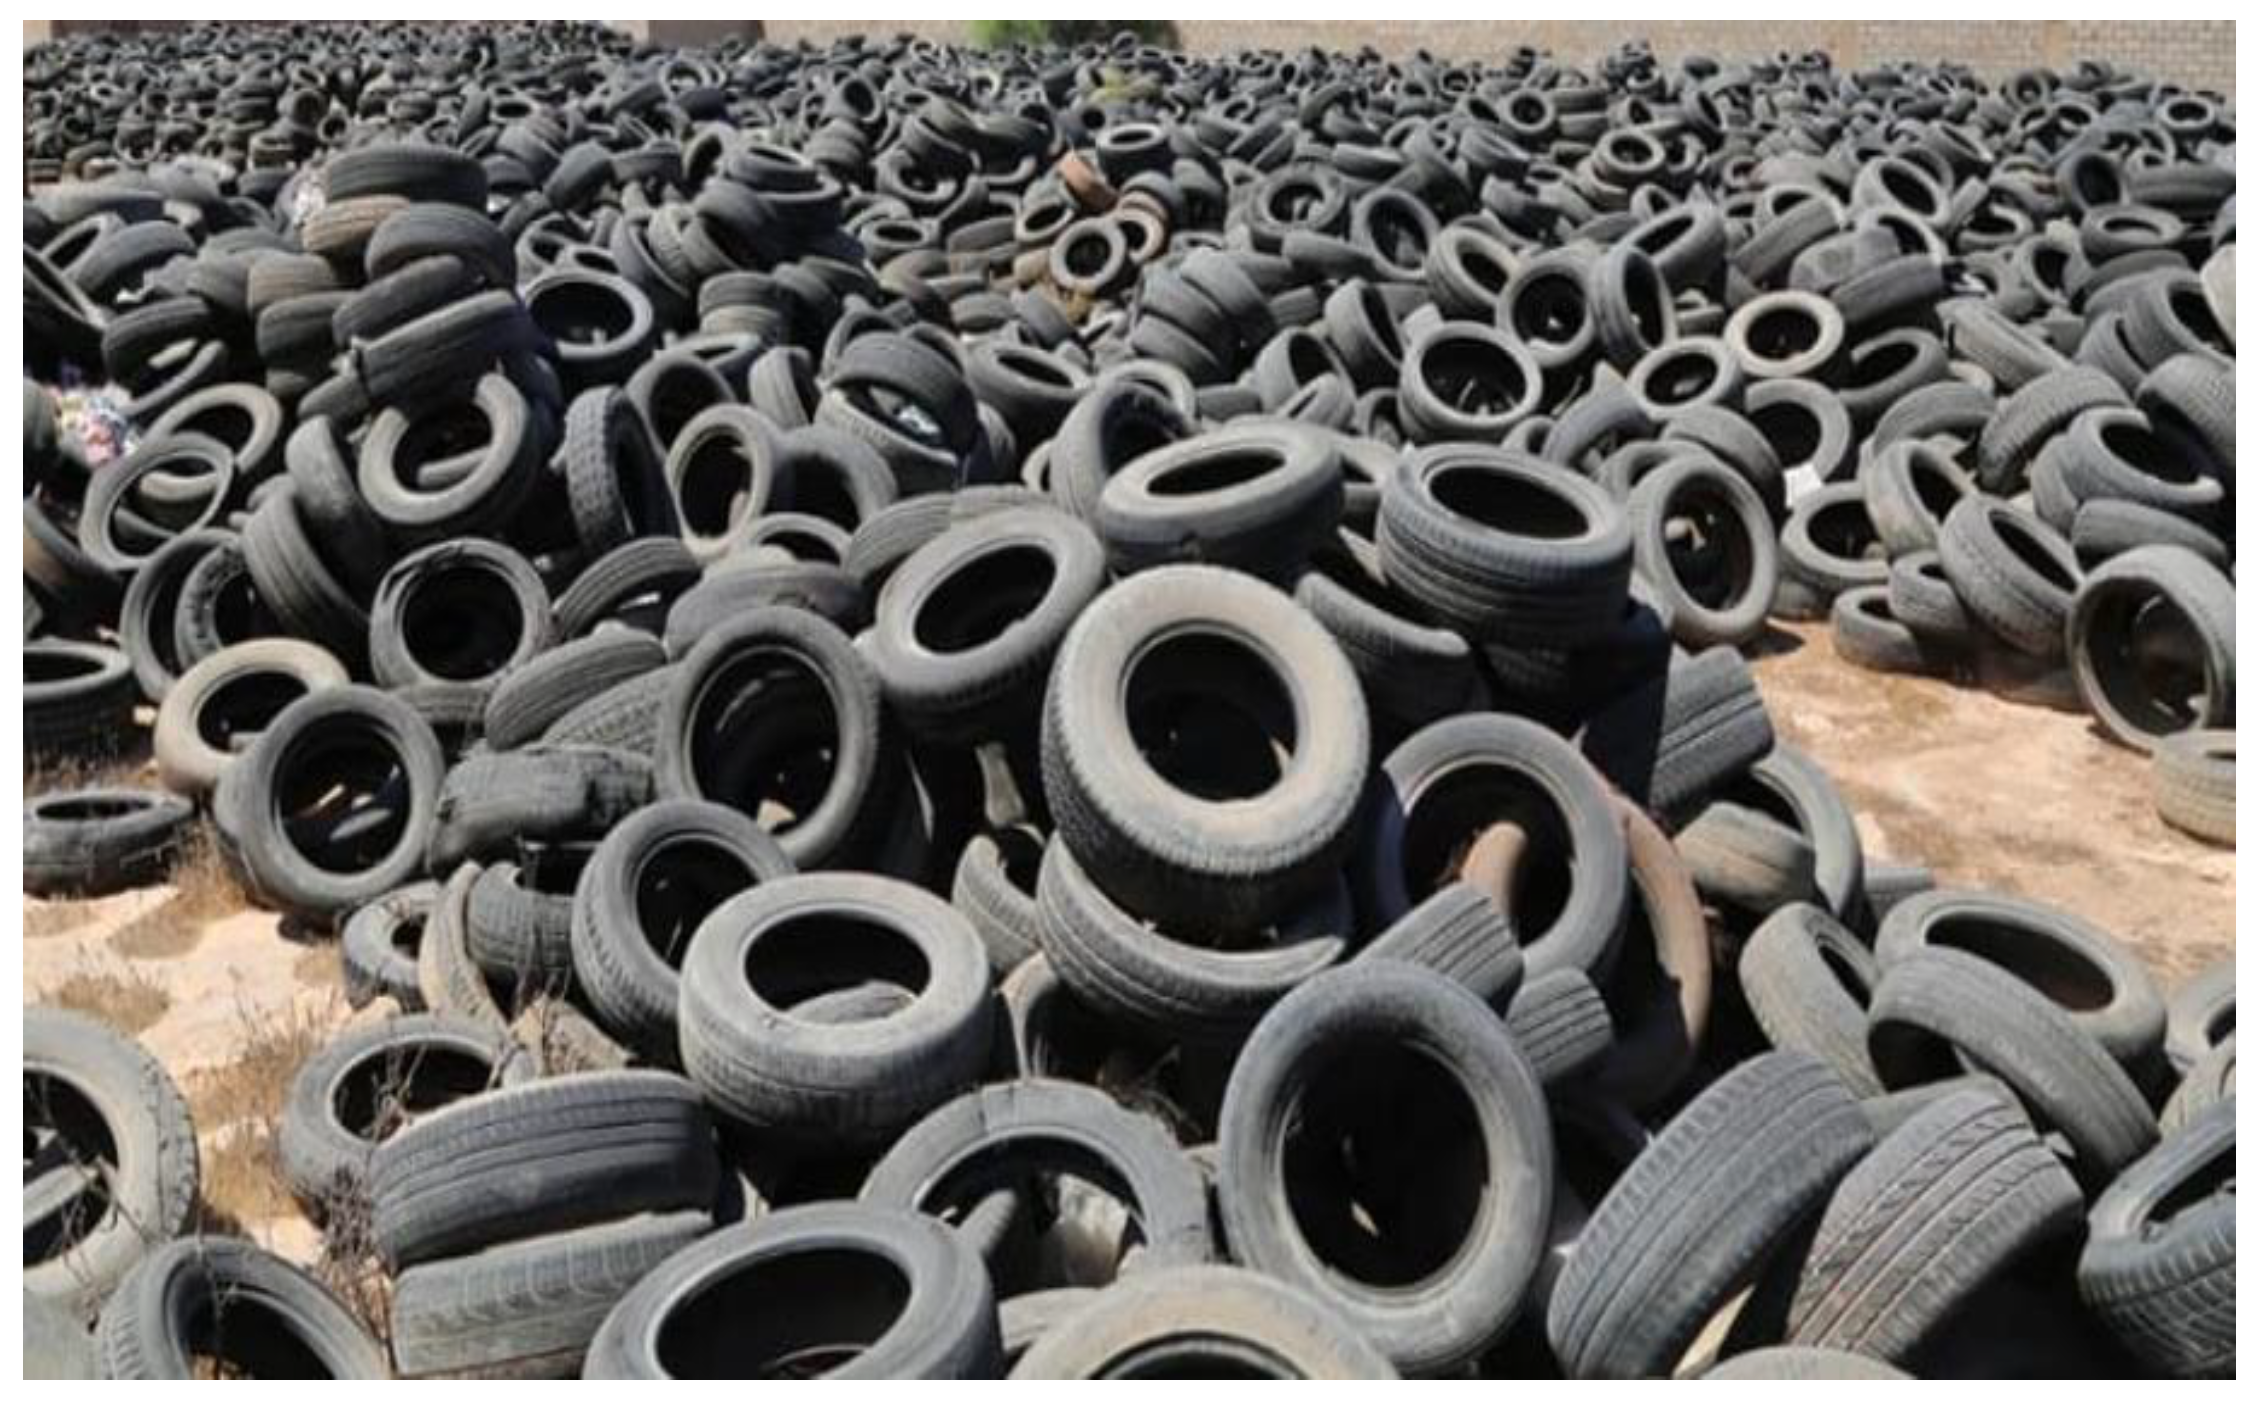 GM is making tires made from natural rubber to be more sustainable